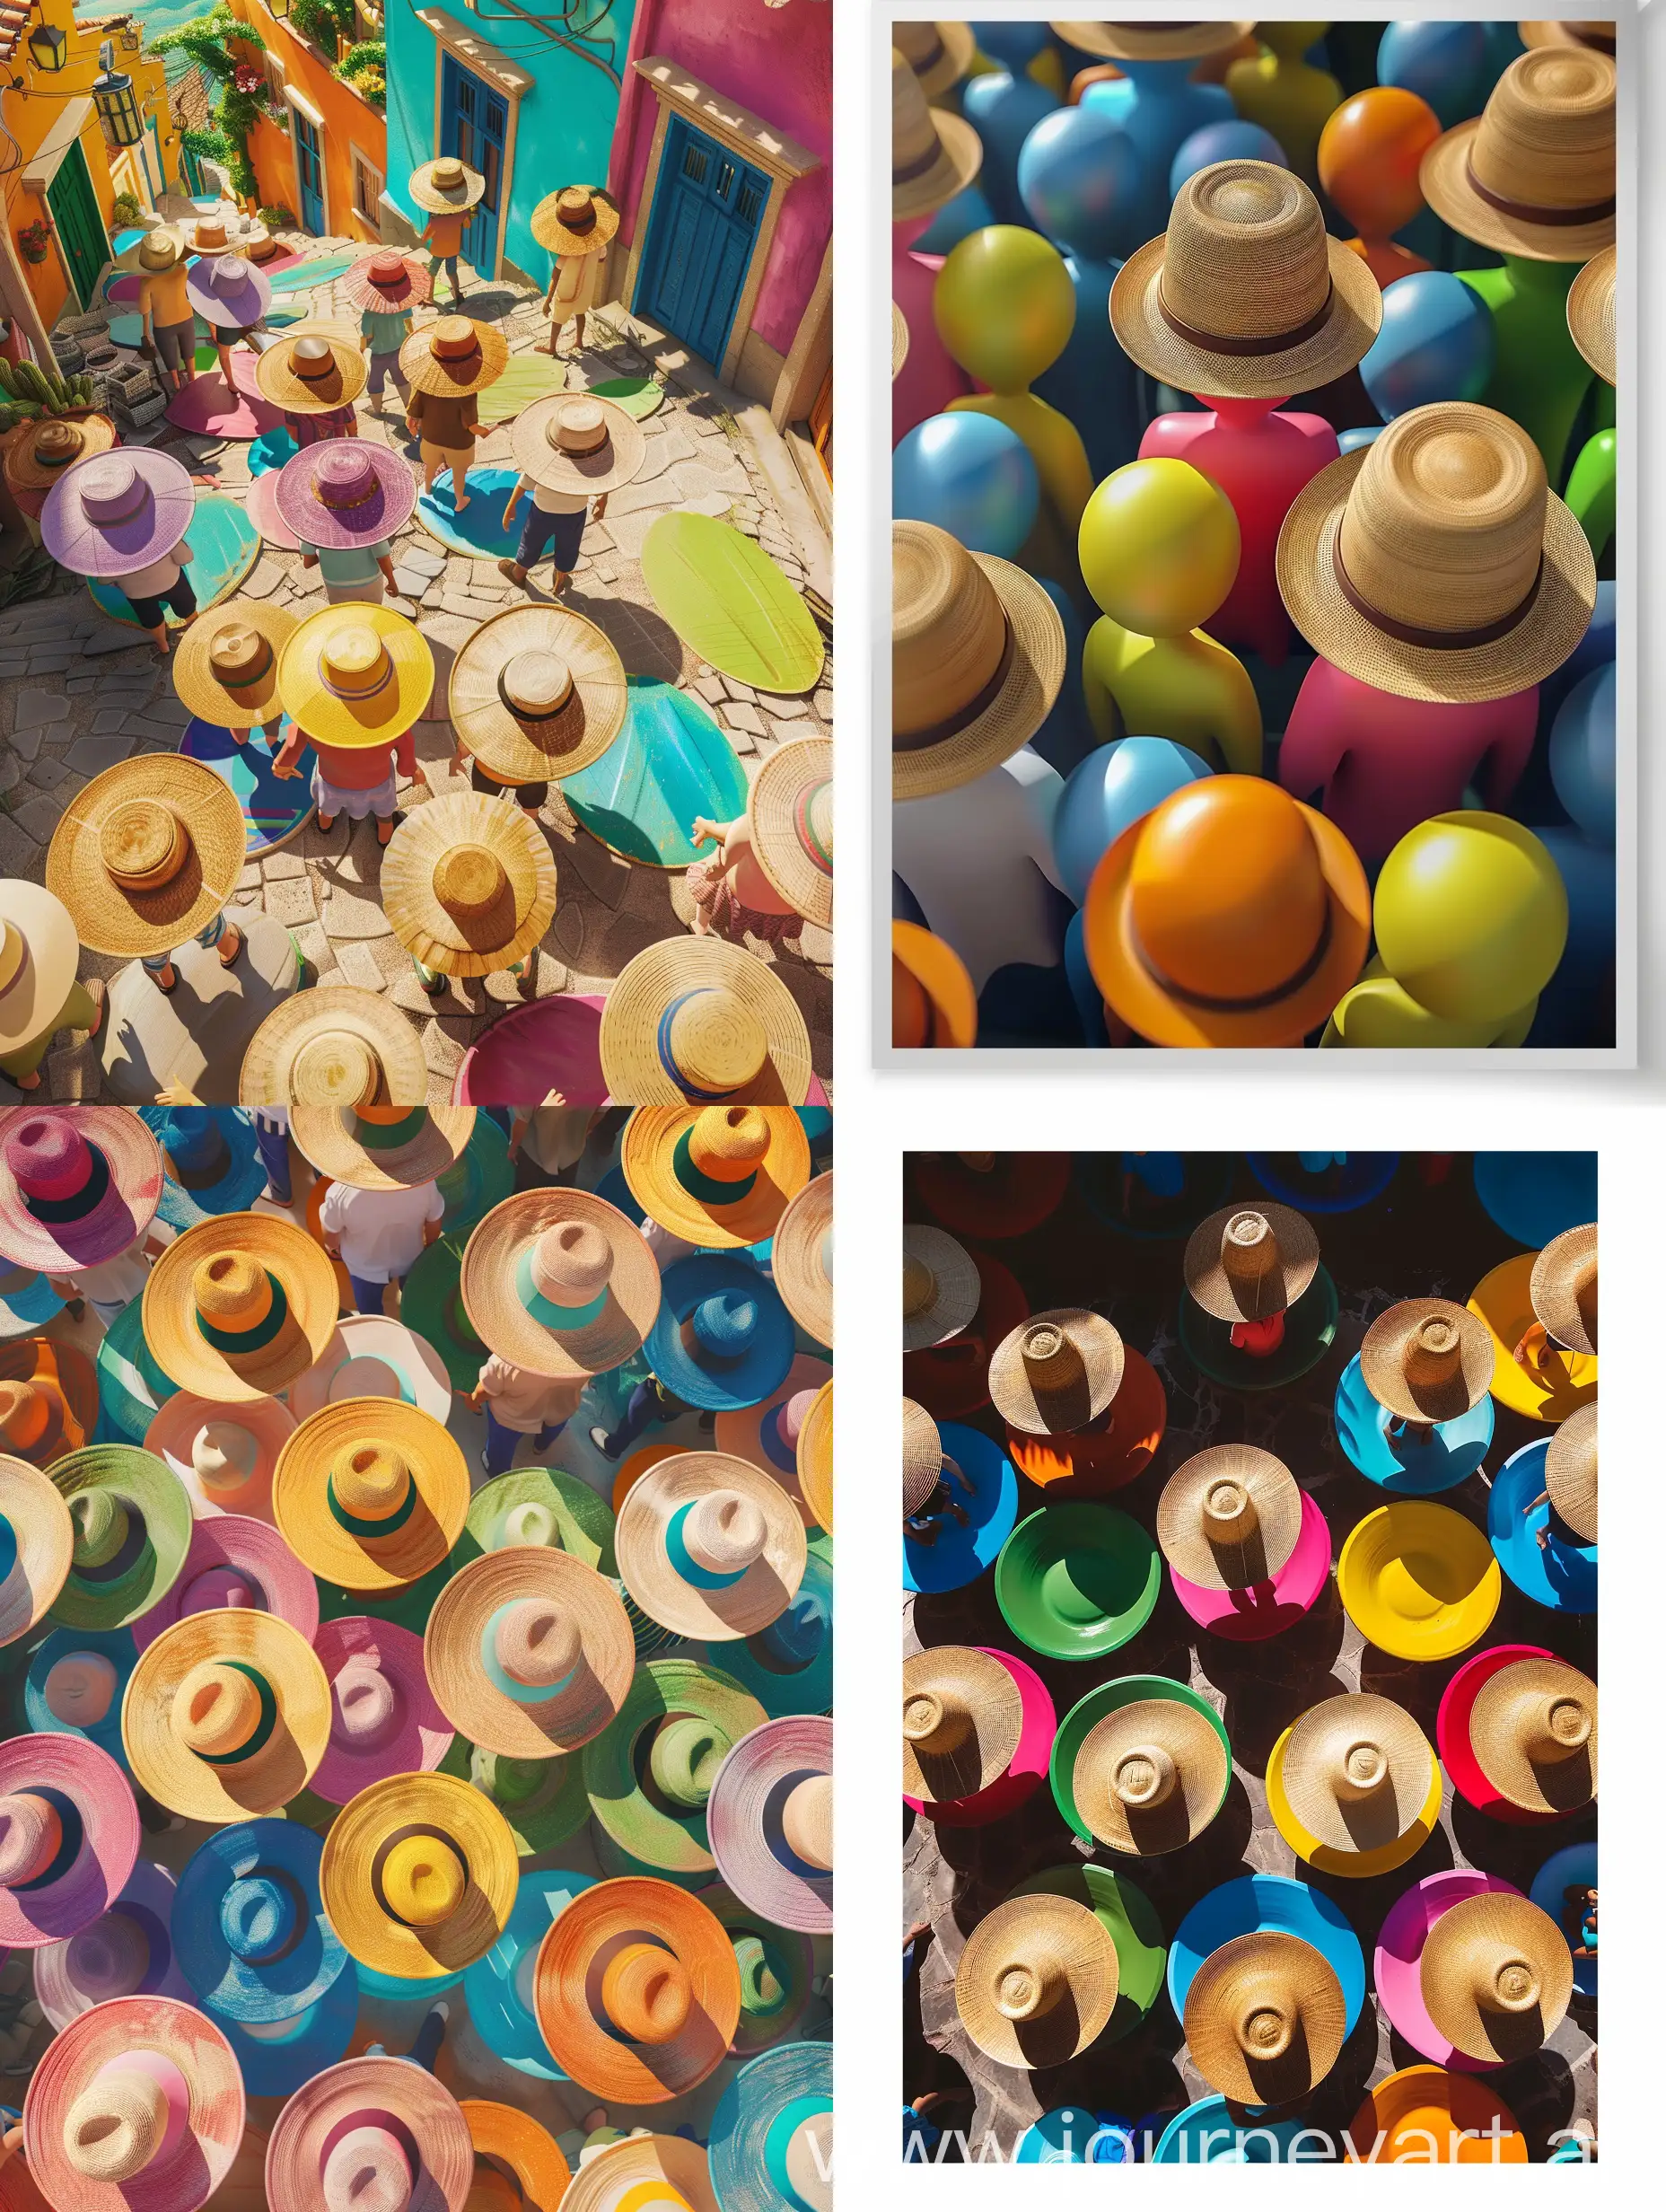 Straw-Hat-Figures-in-Colorful-Circles-at-Cloud-Village